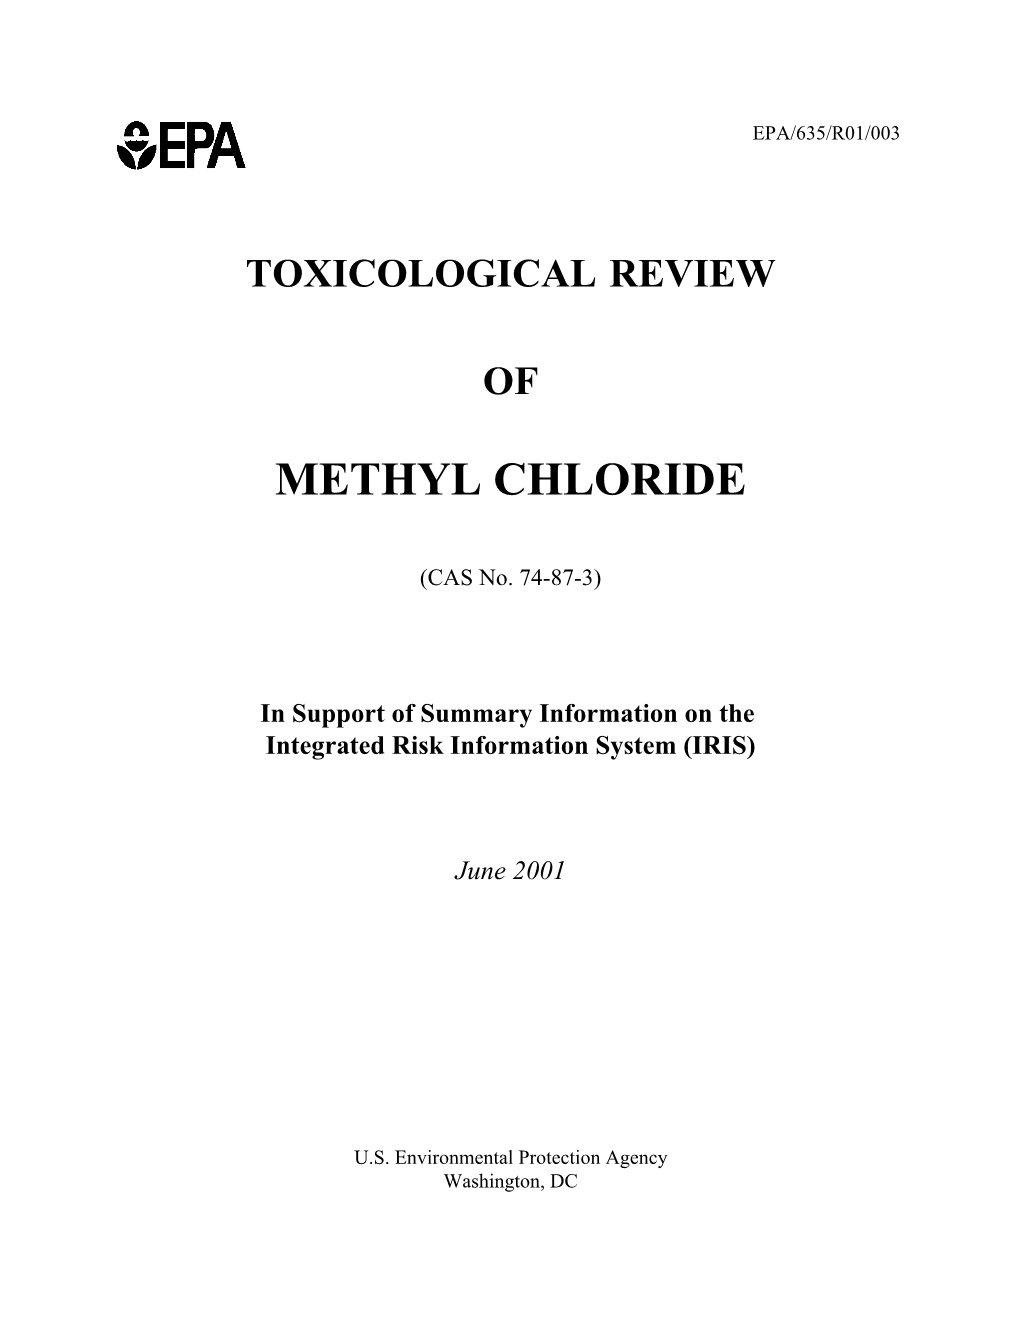 Toxicological Review of Methyl Chloride (CAS No. 74-87-3) (PDF)